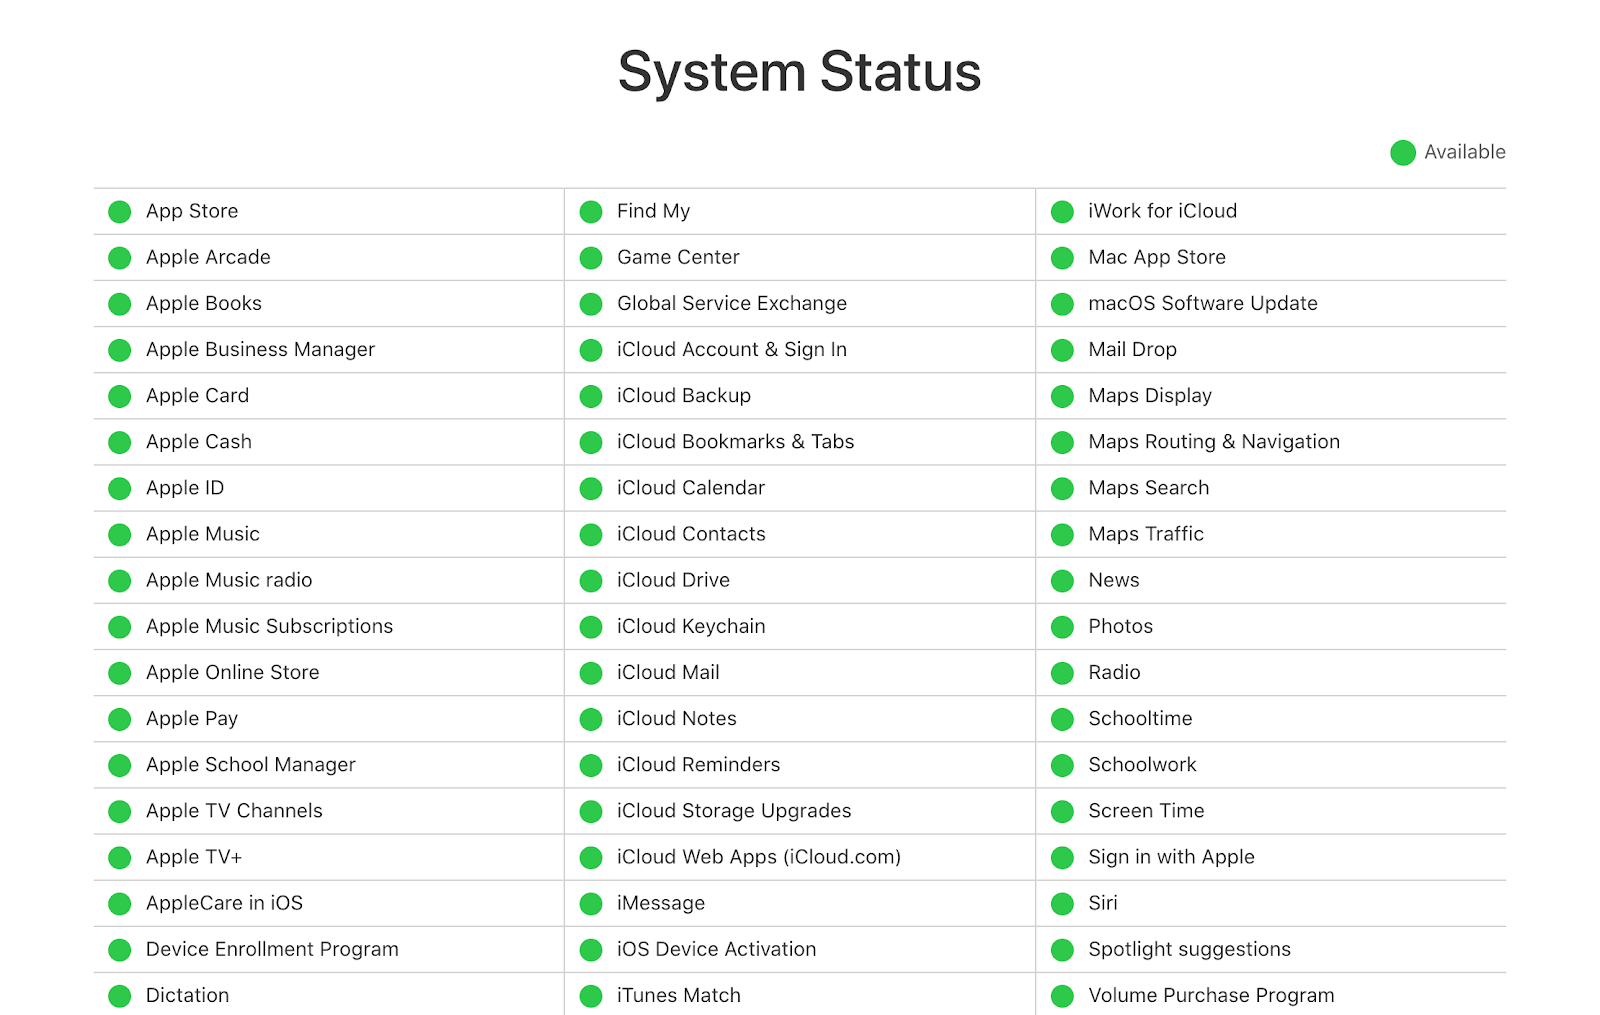 Apple’s system status page